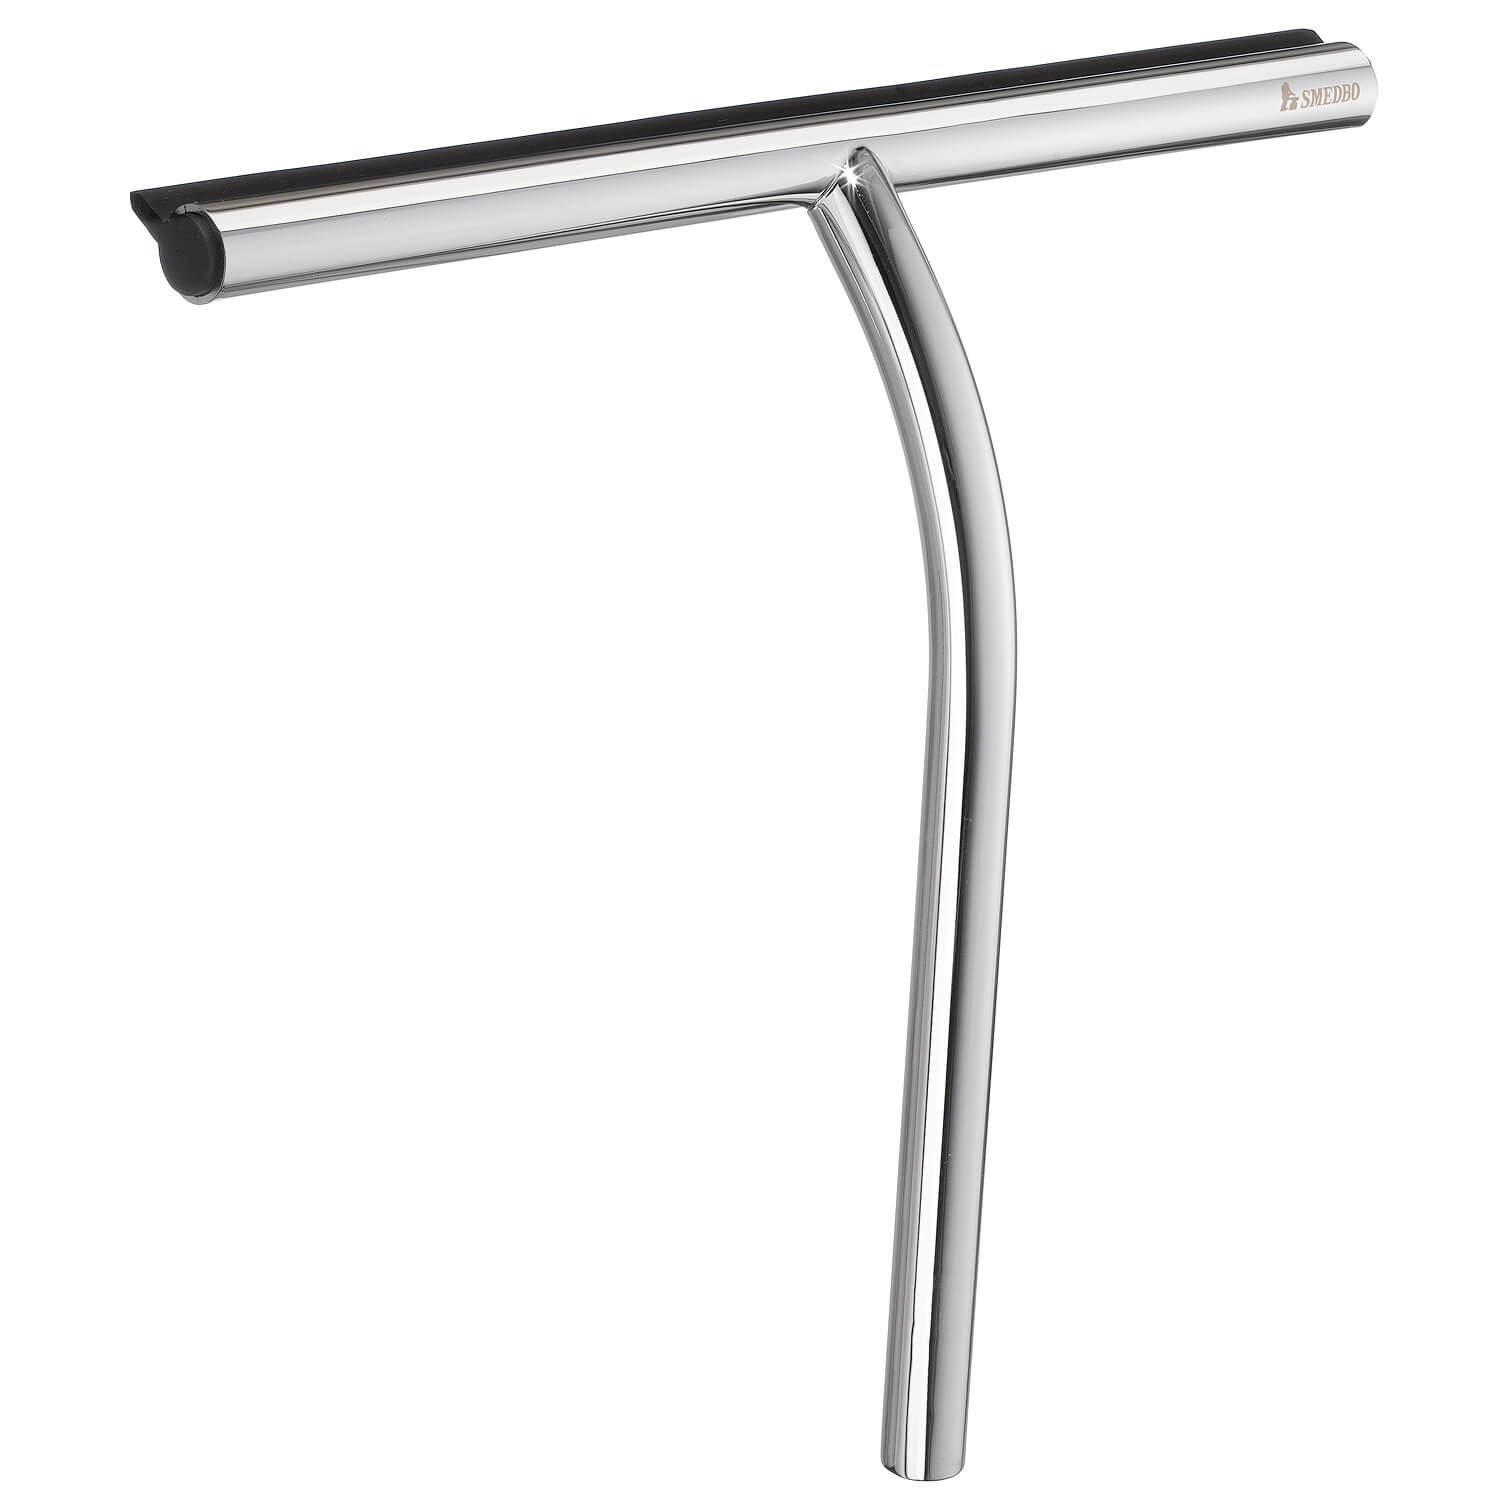 DB2140 by Smedbo - Shower Squeegee with self-adhesive Hook